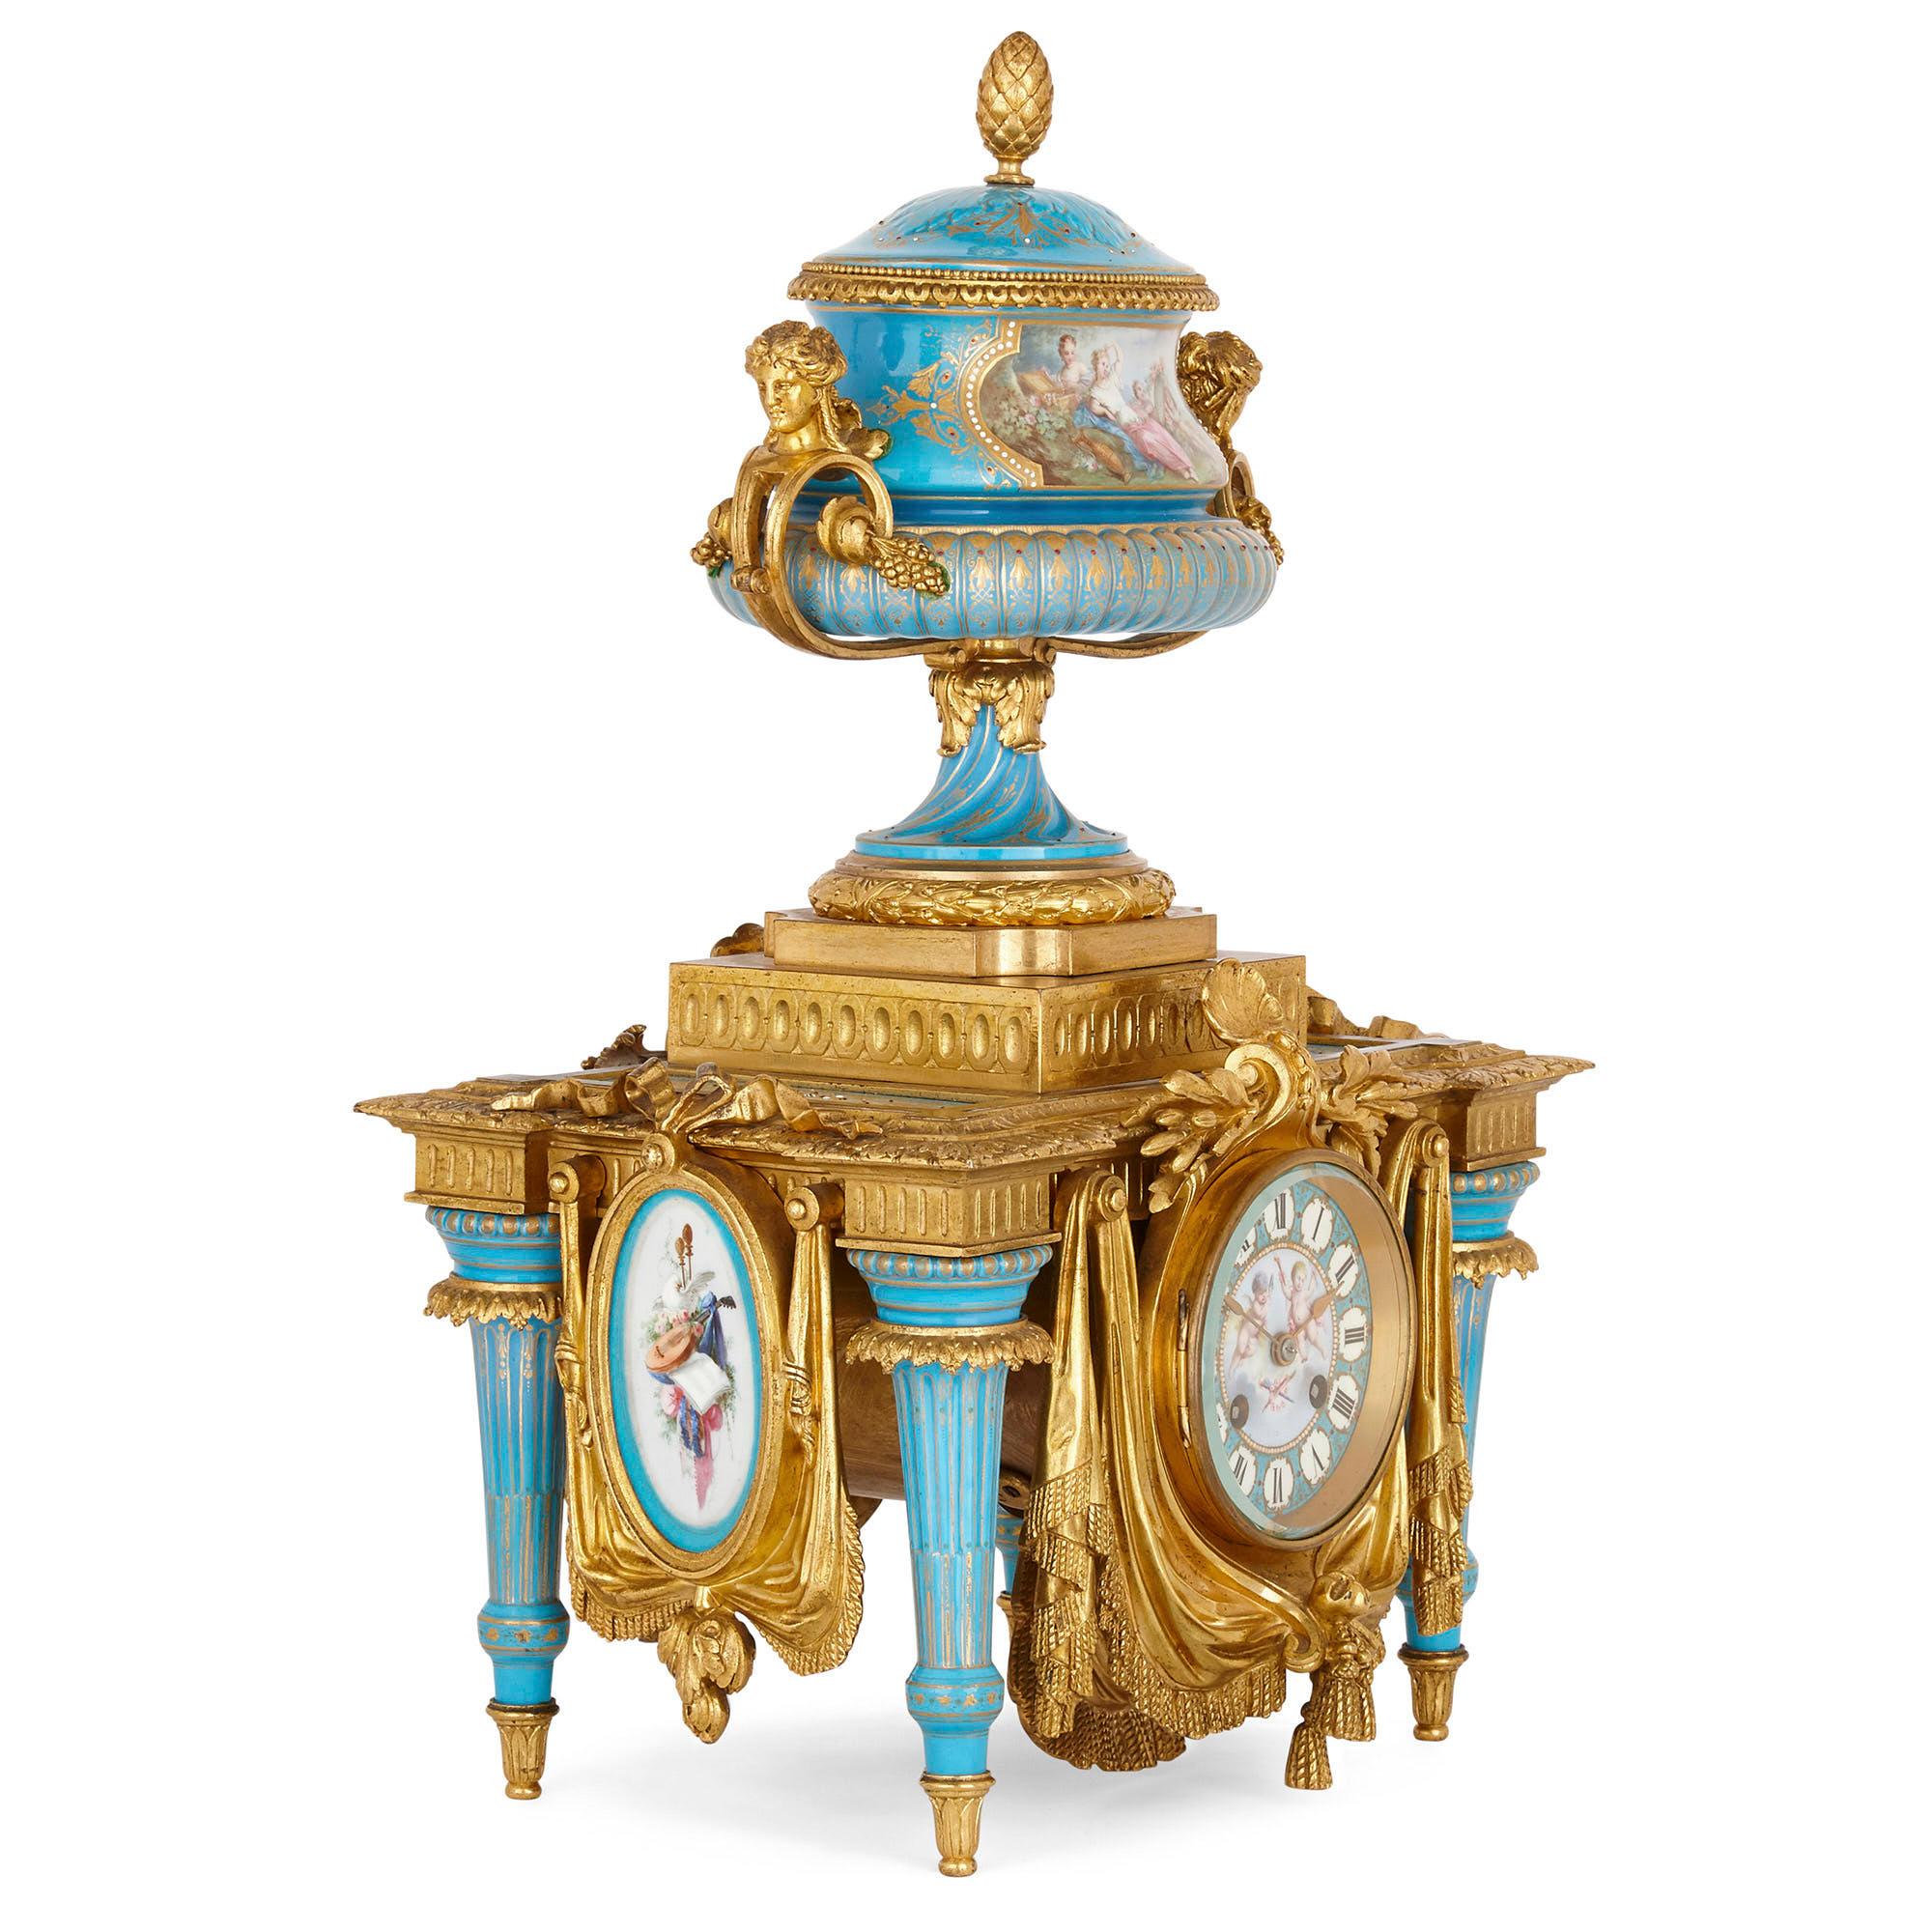 Gilt bronze and Sèvres style porcelain clock garniture
French, 19th century
Measures: Clock height 46cm, width 29cm, depth 24cm
Candelabra height 59cm, width 22cm, depth 16cm

This exceptional clock set is a remarkable example of 19th century